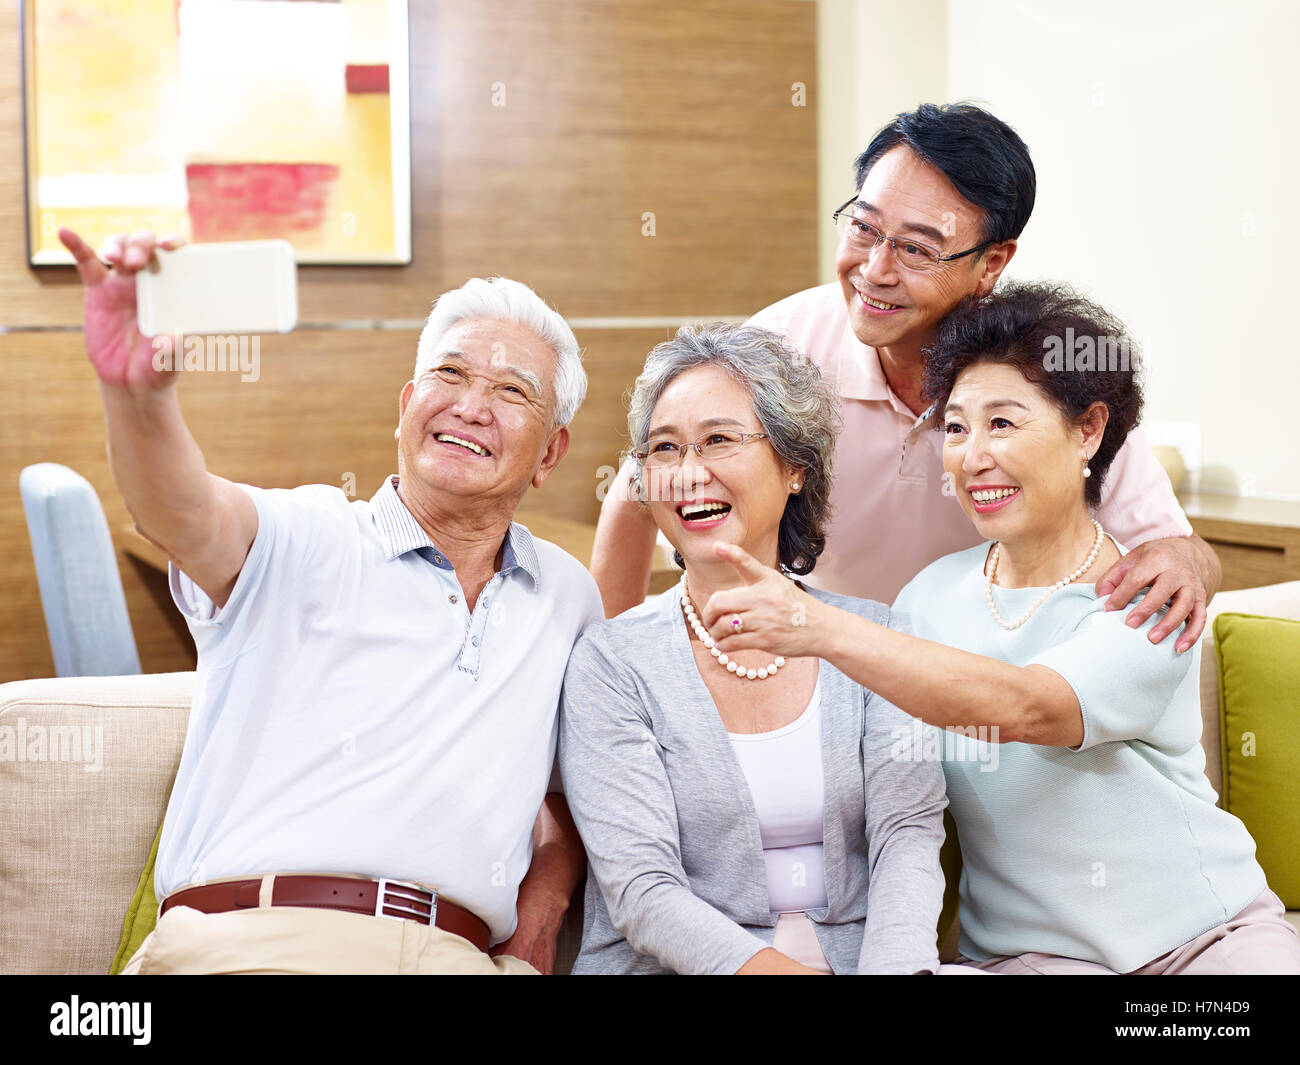 two senior couples taking a selfie on couch at home Stock Photo